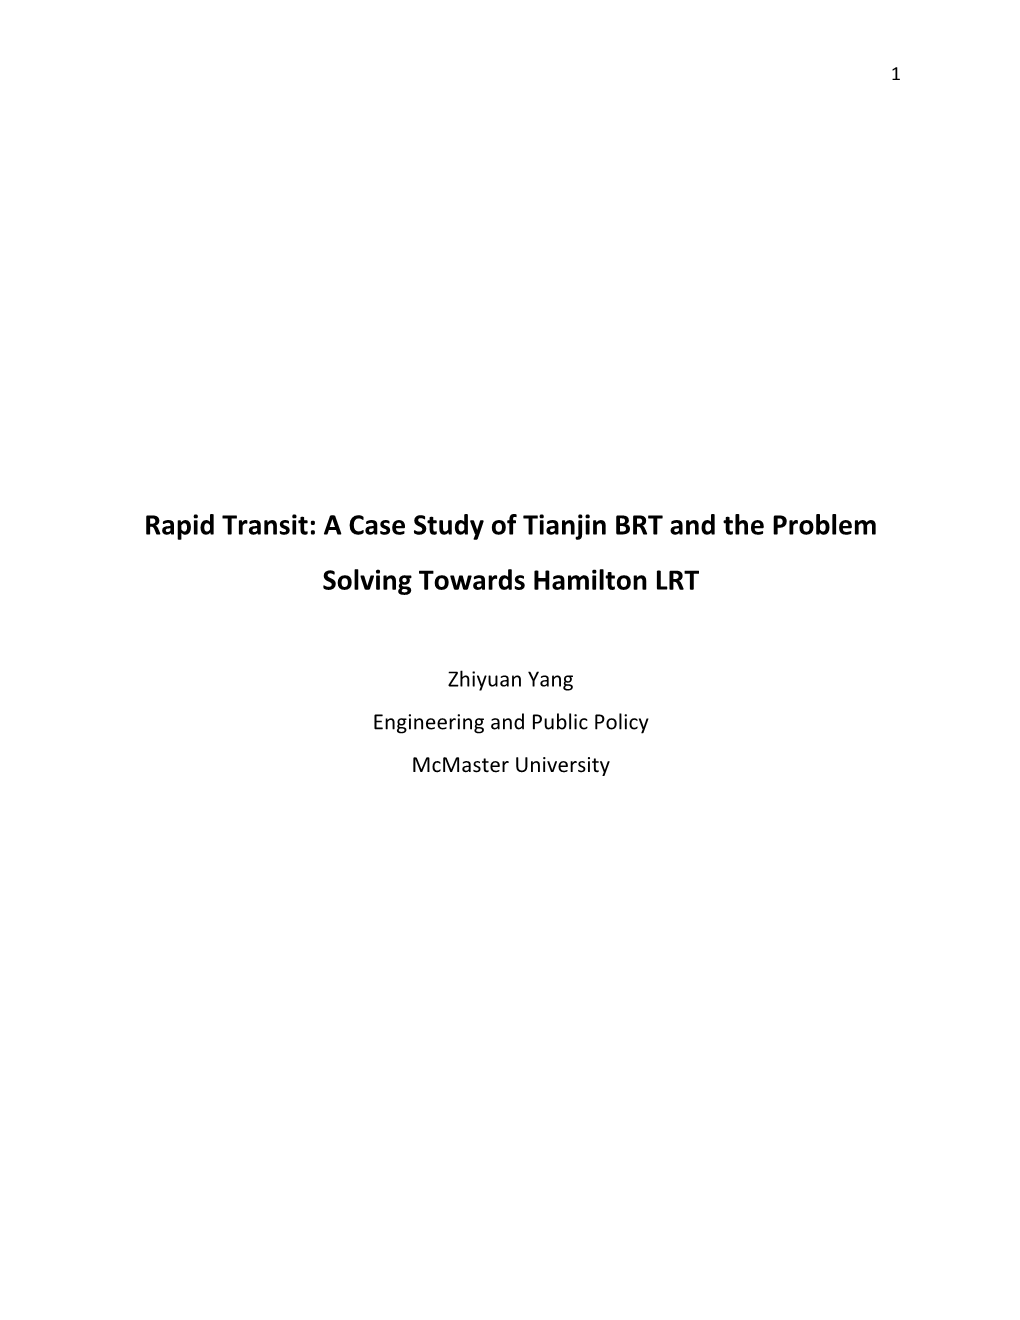 Rapid Transit: a Case Study of Tianjin BRT and the Problem Solving Towards Hamilton LRT